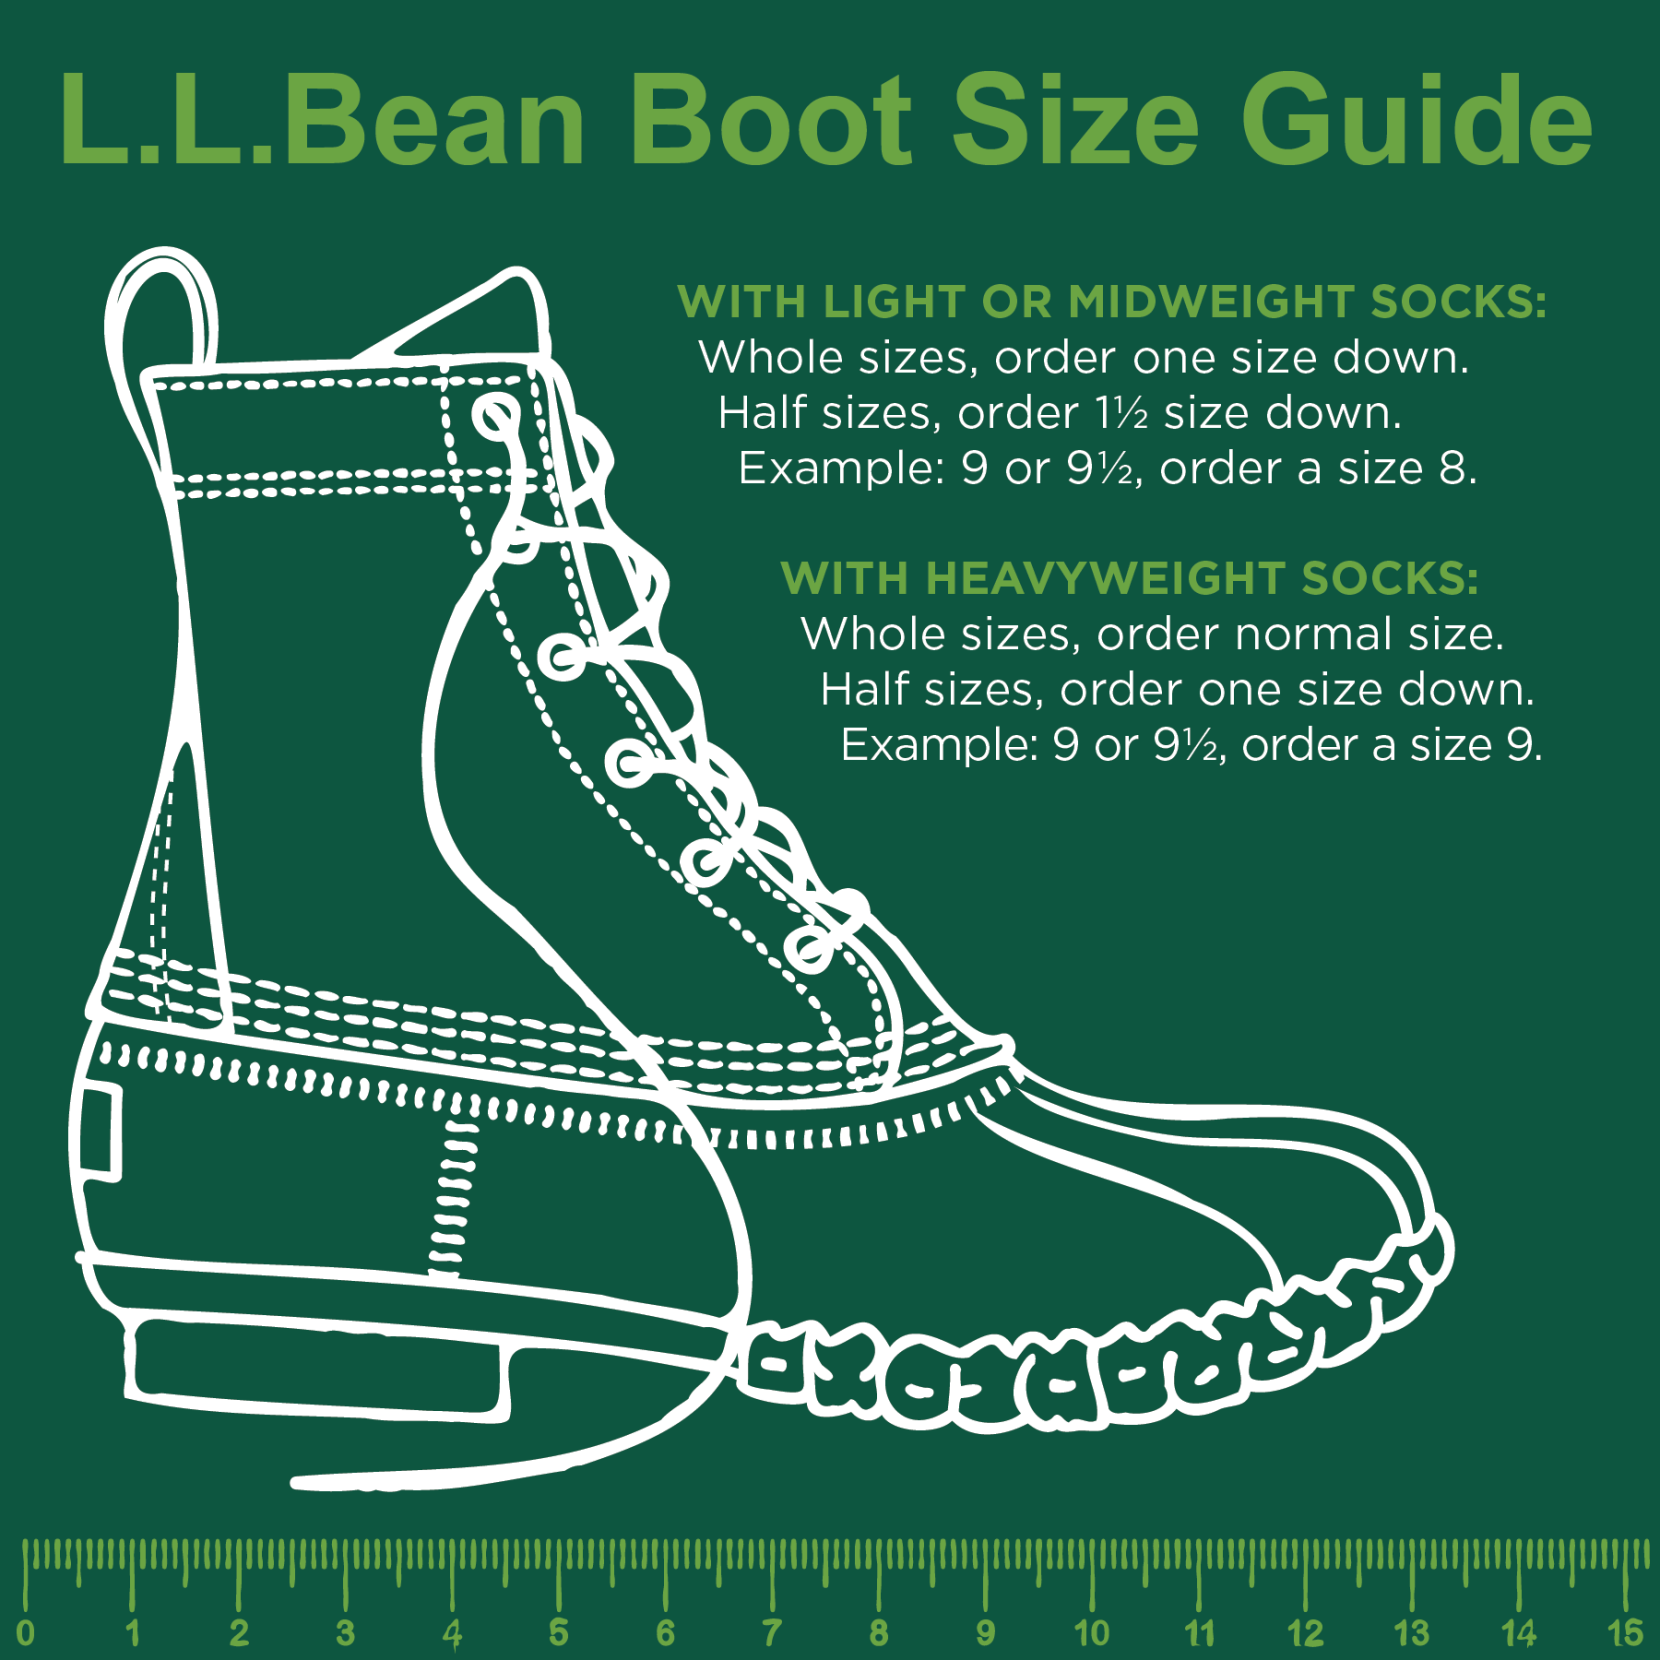 L.L.Bean Boot Sizing Guide